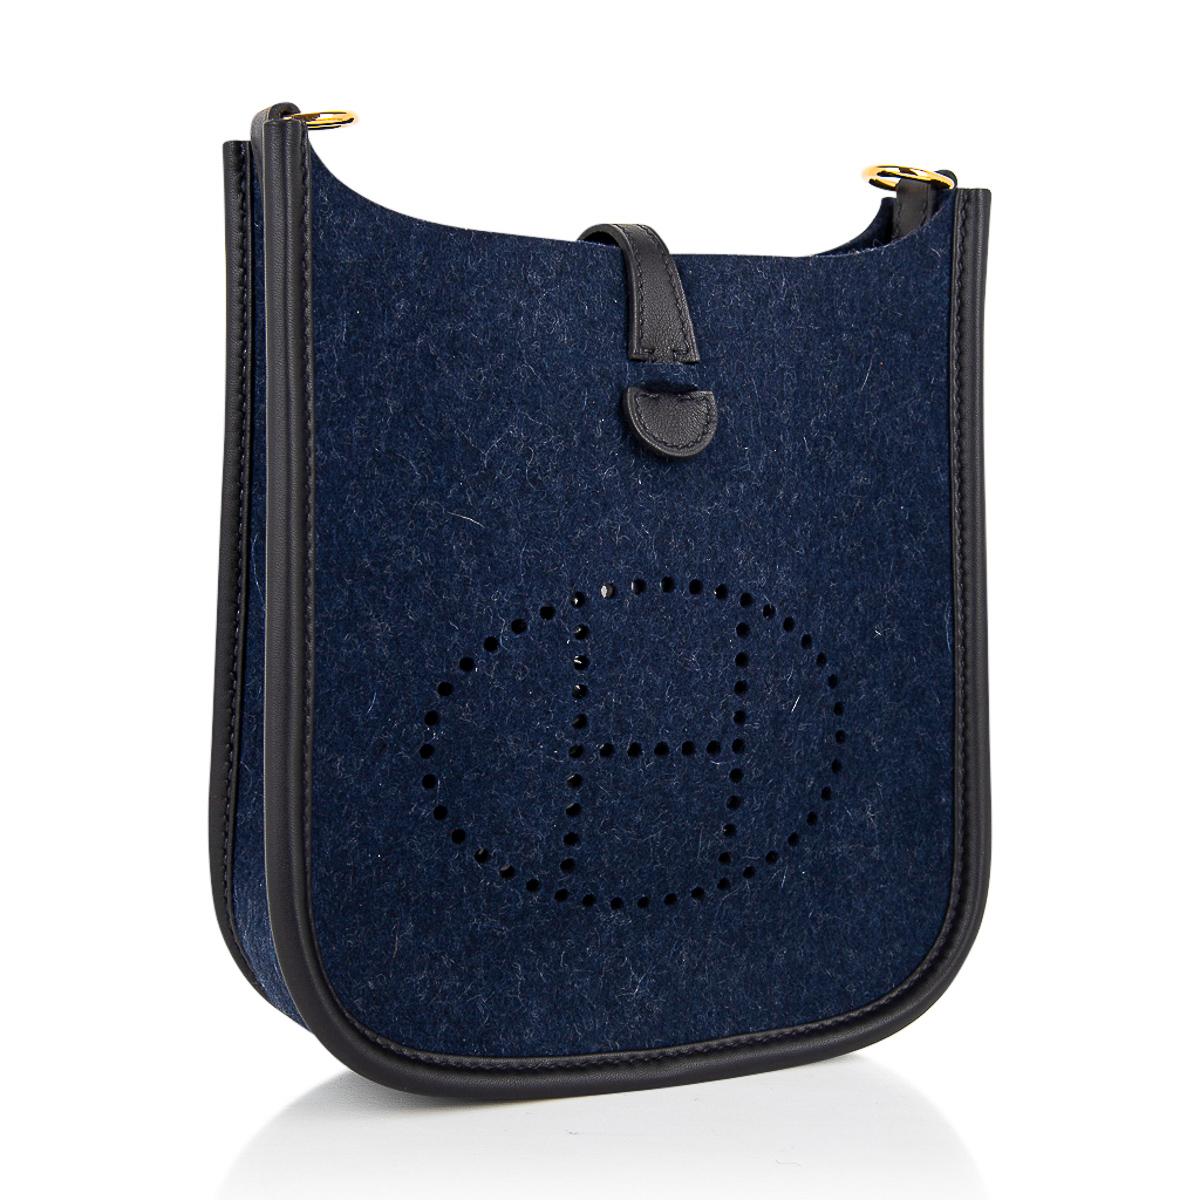 Mightychic offers an Hermes Evelyne TPM featured in Blue Feutre (felt) with Gold hardware.  
Trimmed in Black Swift leather.
Signature perforated H on front of bag.
Fabulous shoulder or cross body bag. 
Black Sport strap in textile with leather and